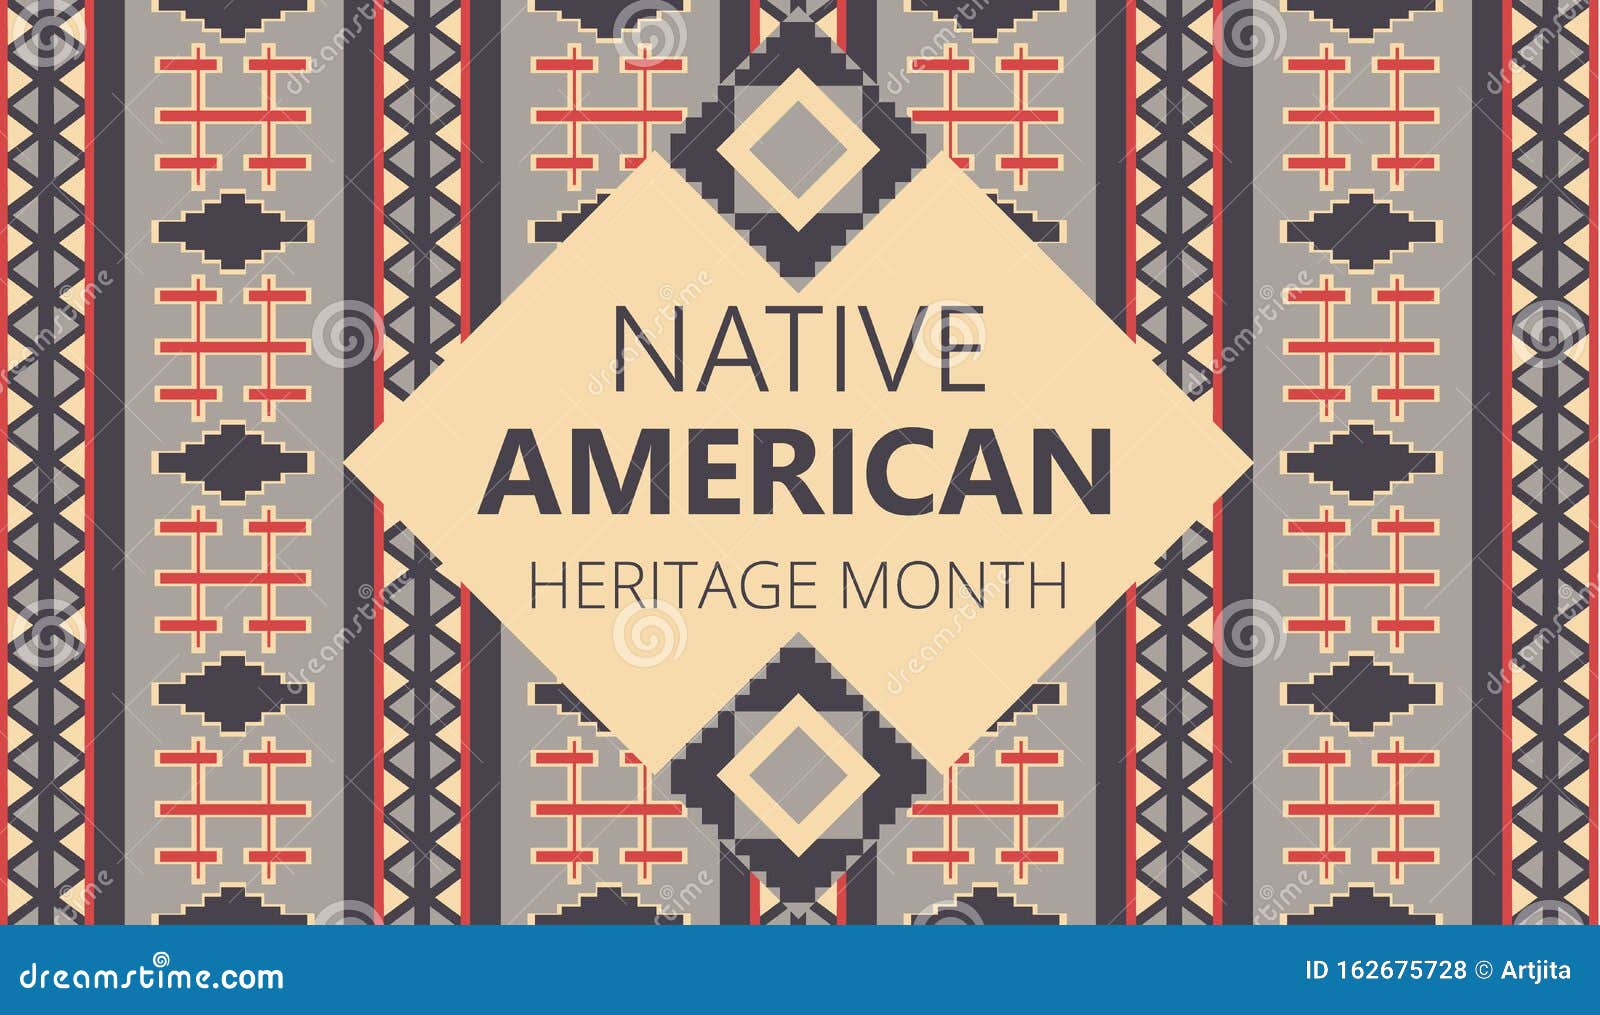 native american heritage month is organized in november in usa. tradition geometric ornament of indians is shown